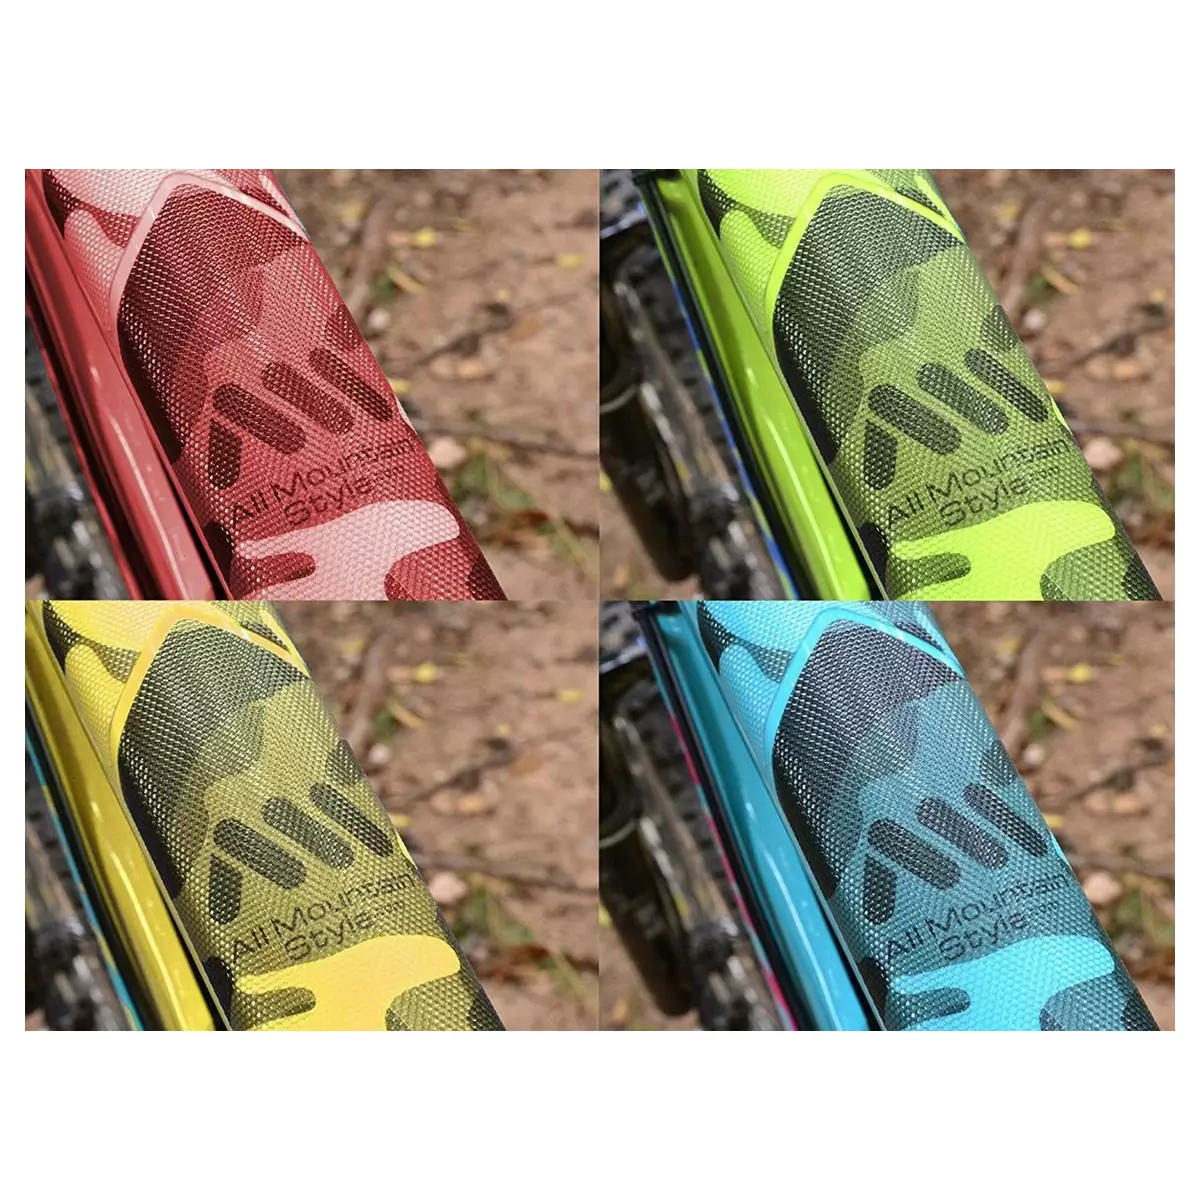 All mountain style amfrcm honeycomb protection frame guard set camo H